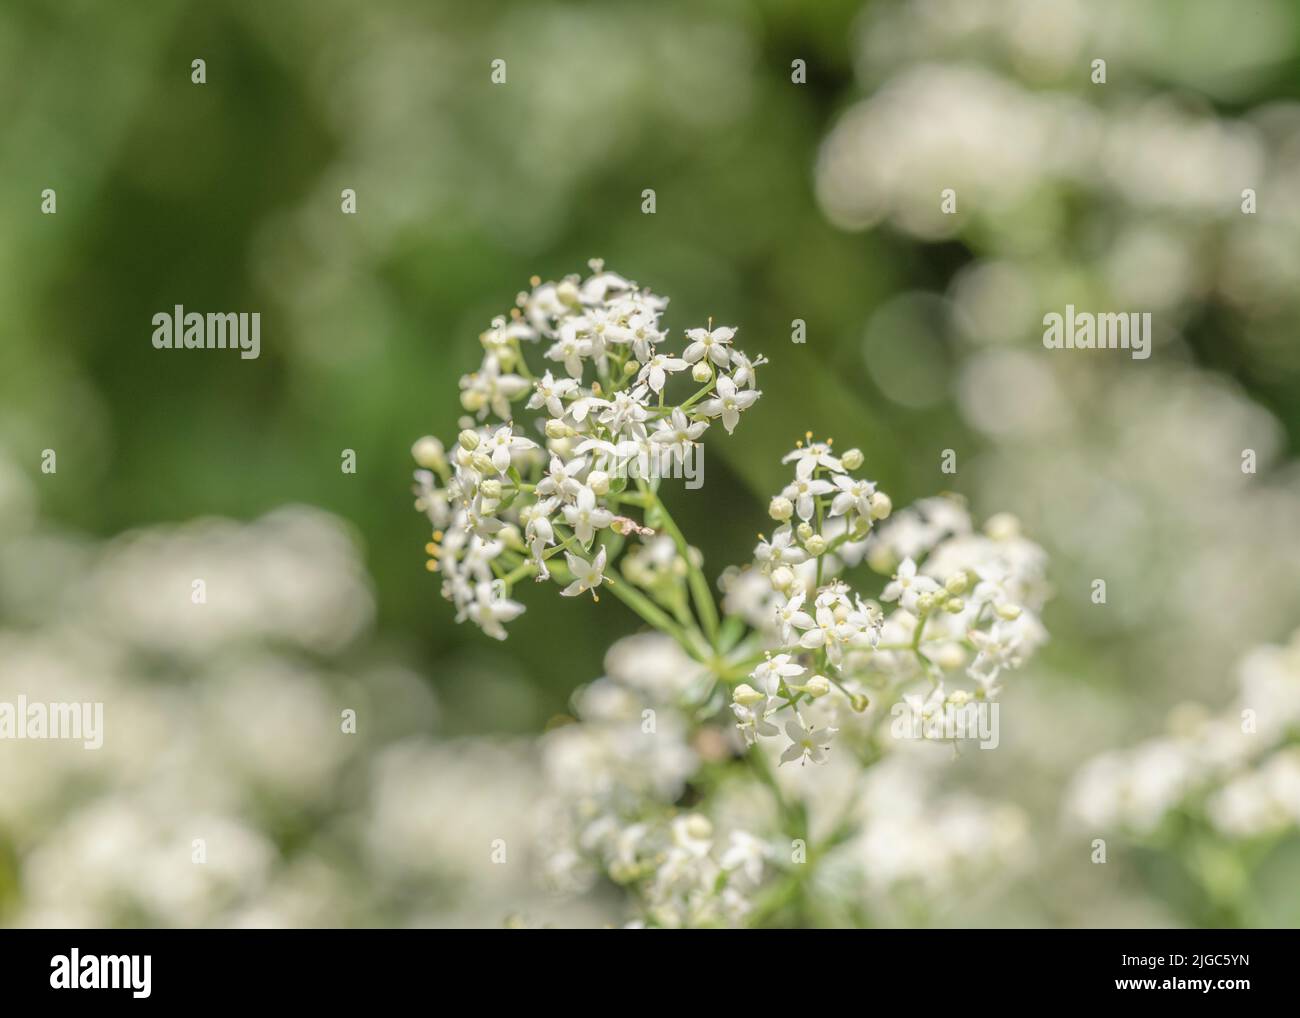 Close-up of white flowers of Hedge Bedstraw / Galium mollugo a common hedgerow medicinal plant once used in remedies. Related to Cleavers / G. aparine Stock Photo